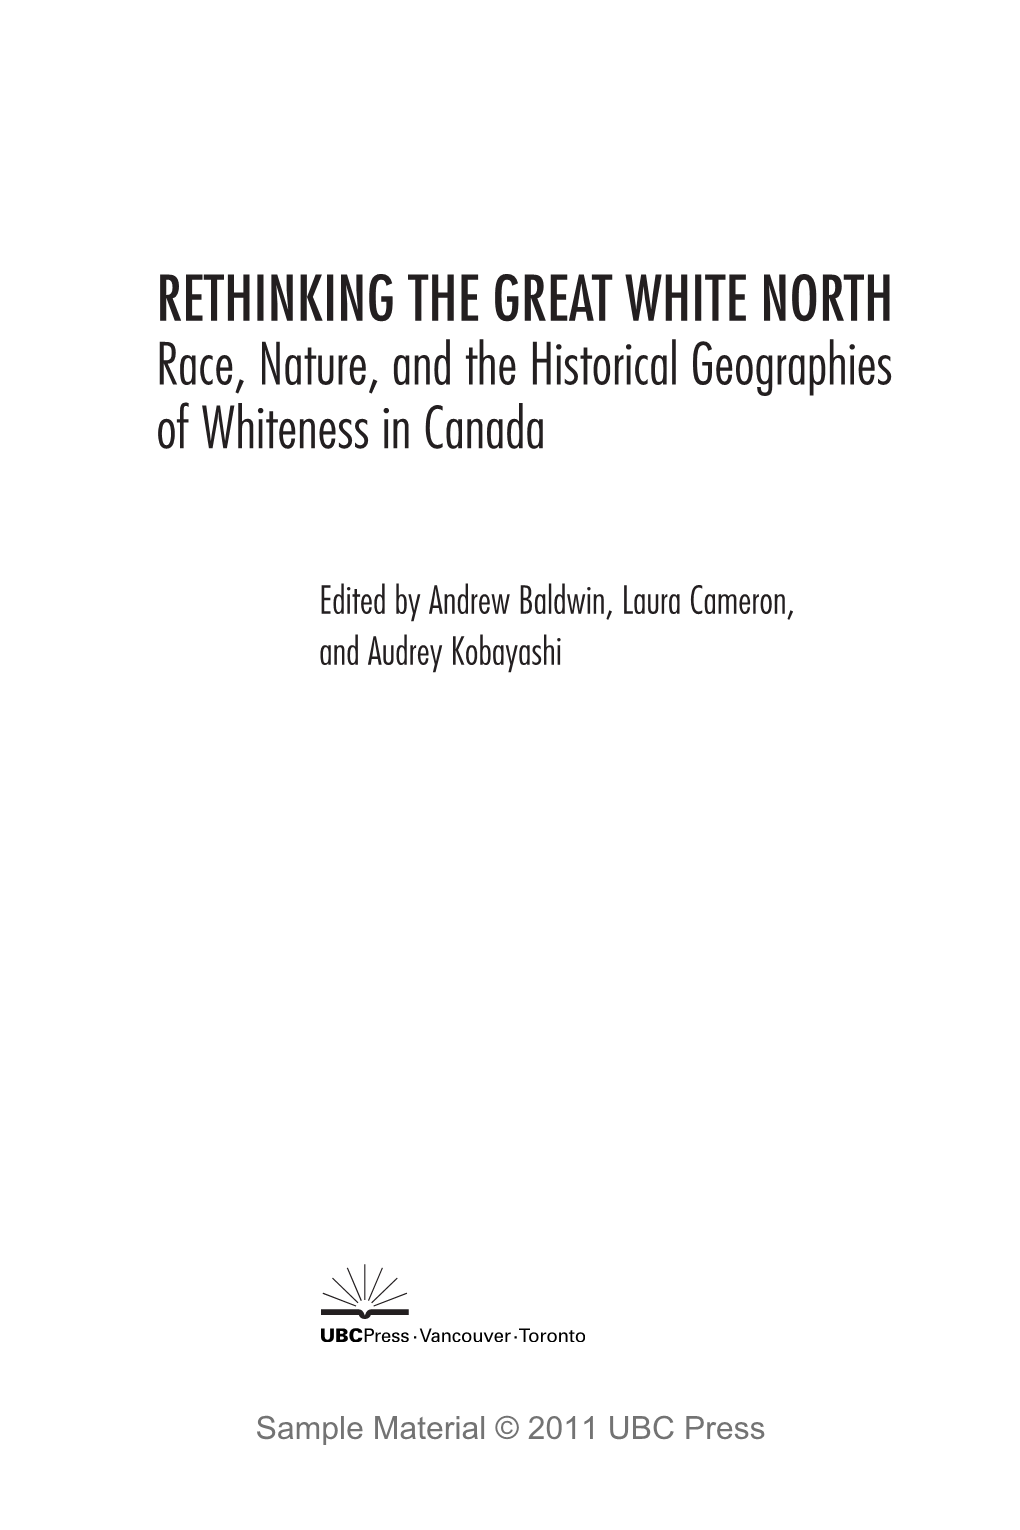 RETHINKING the GREAT WHITE NORTH Race, Nature, and the Historical Geographies of Whiteness in Canada